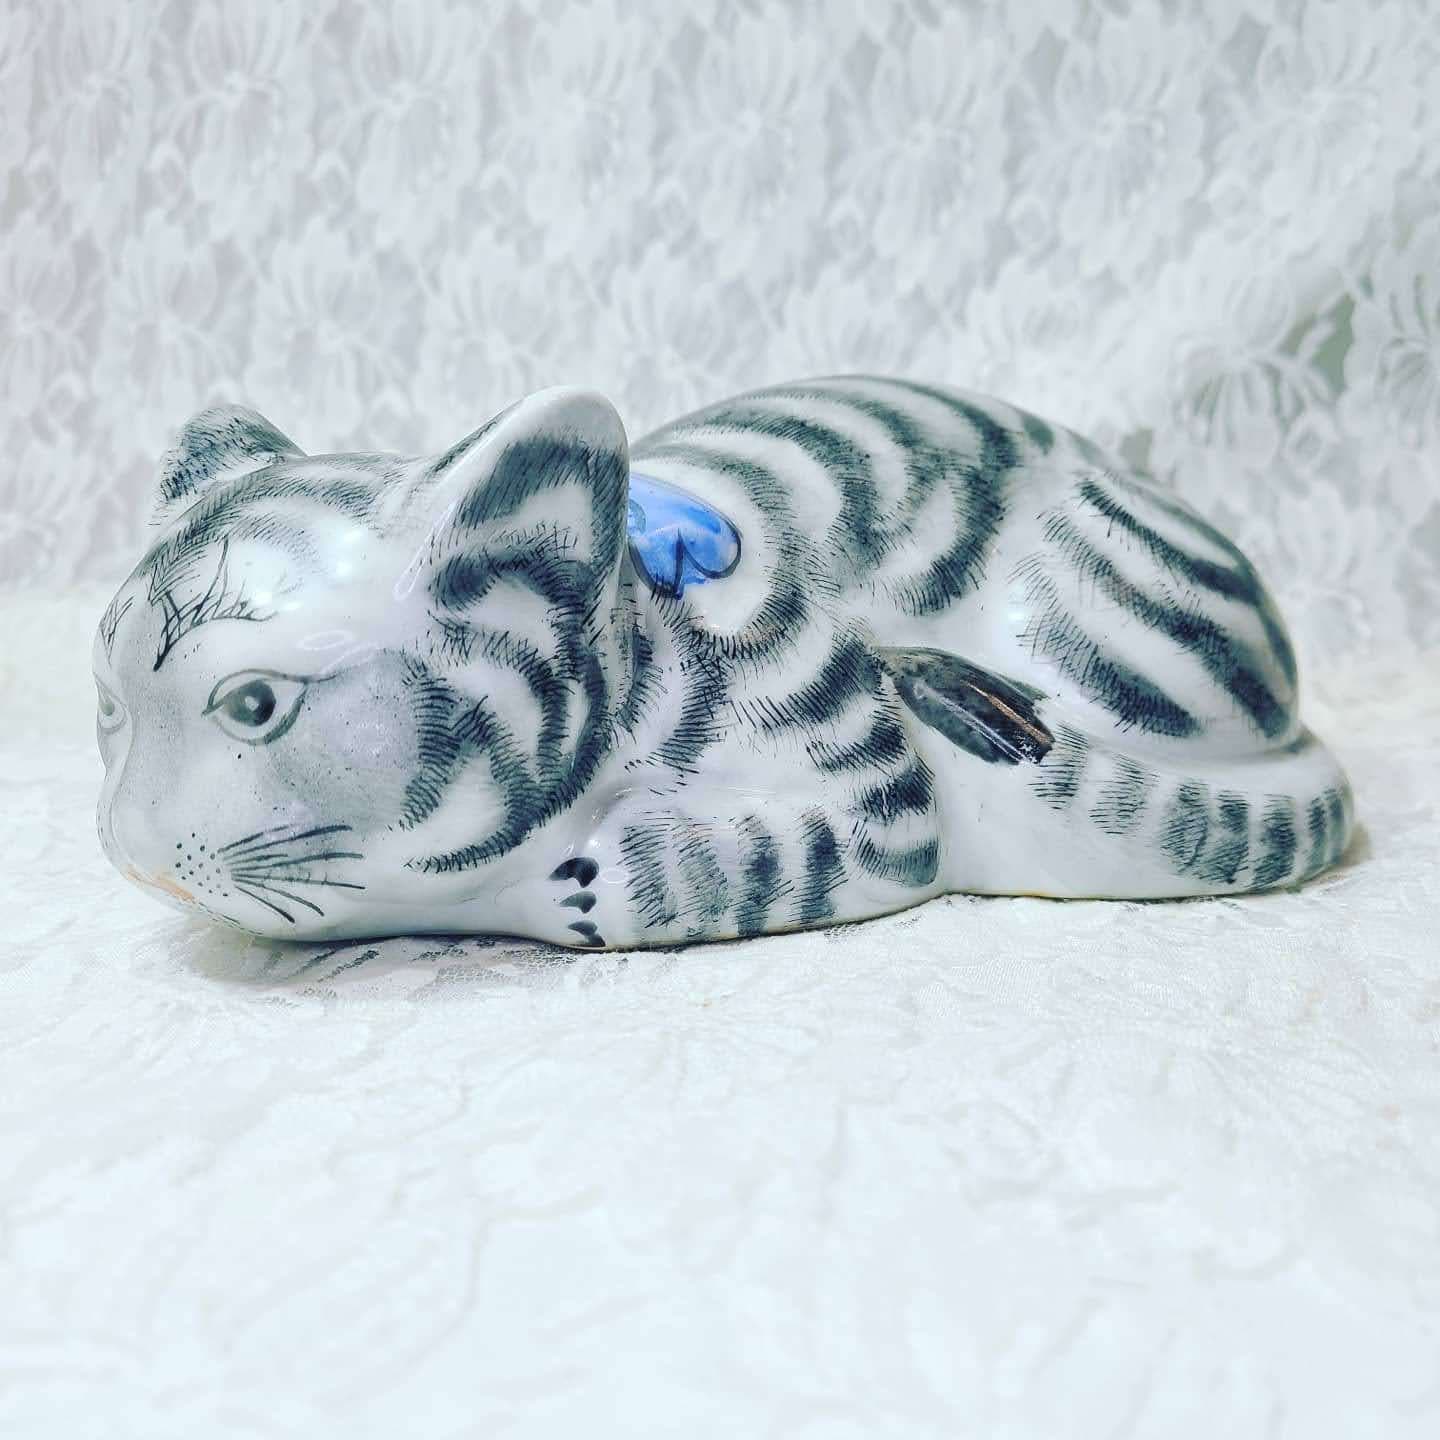 Porcelain Striped CAT Statue Figurine ~ Intricate Hand Painted Chinese Chinoiseries Sleepy Cat Ceramic Figure Soft Grey Colors ~ 8.25" x 3.5"